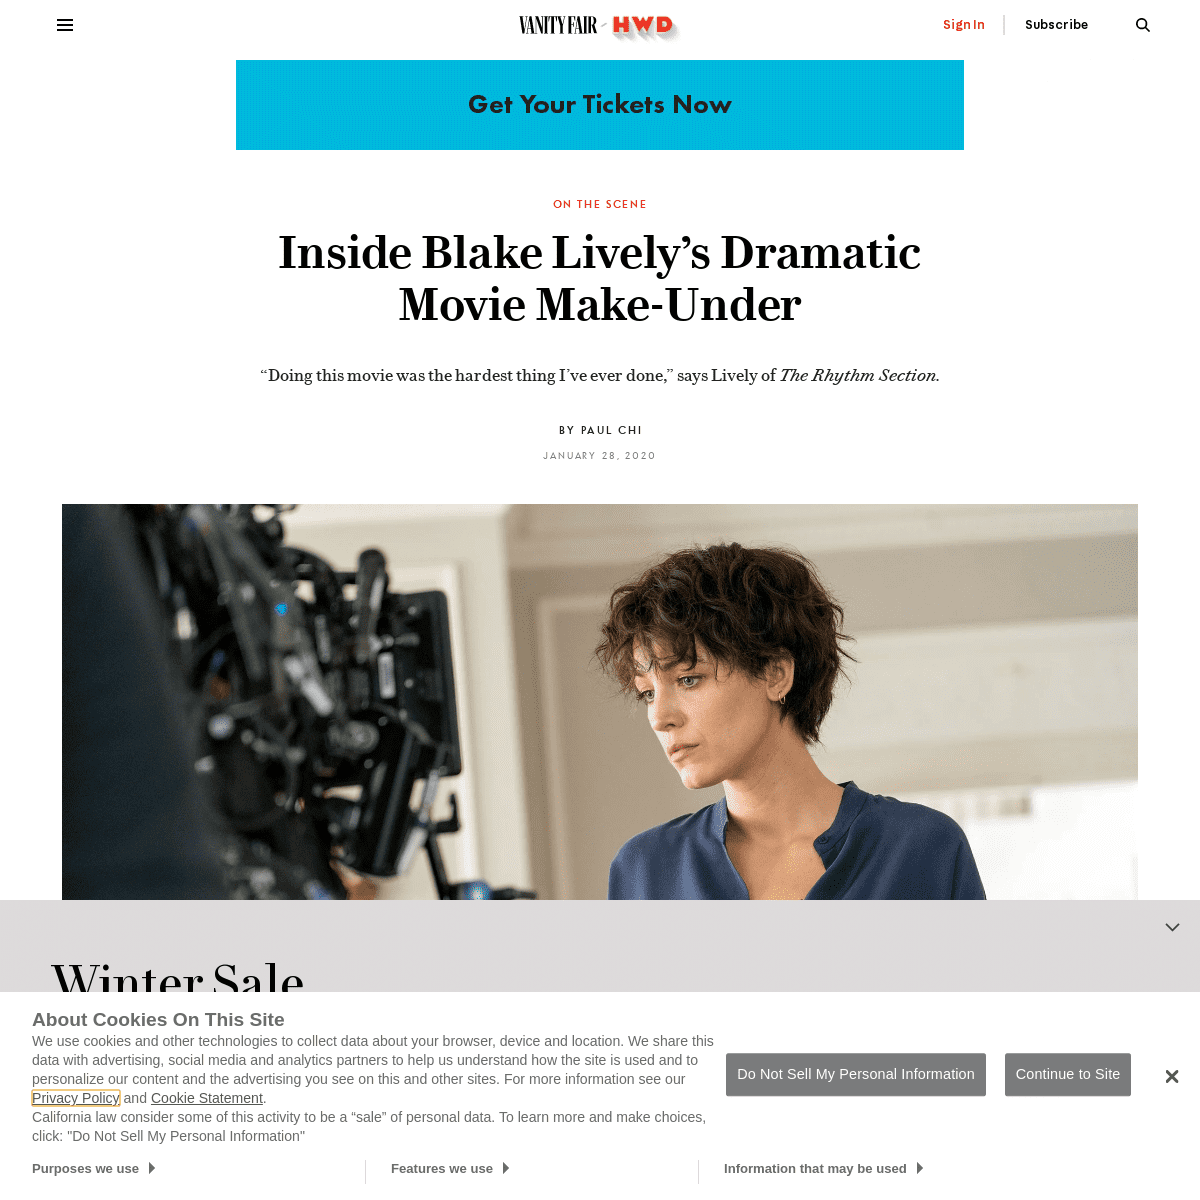 A complete backup of www.vanityfair.com/hollywood/2020/01/blake-lively-the-rhythm-section-movie